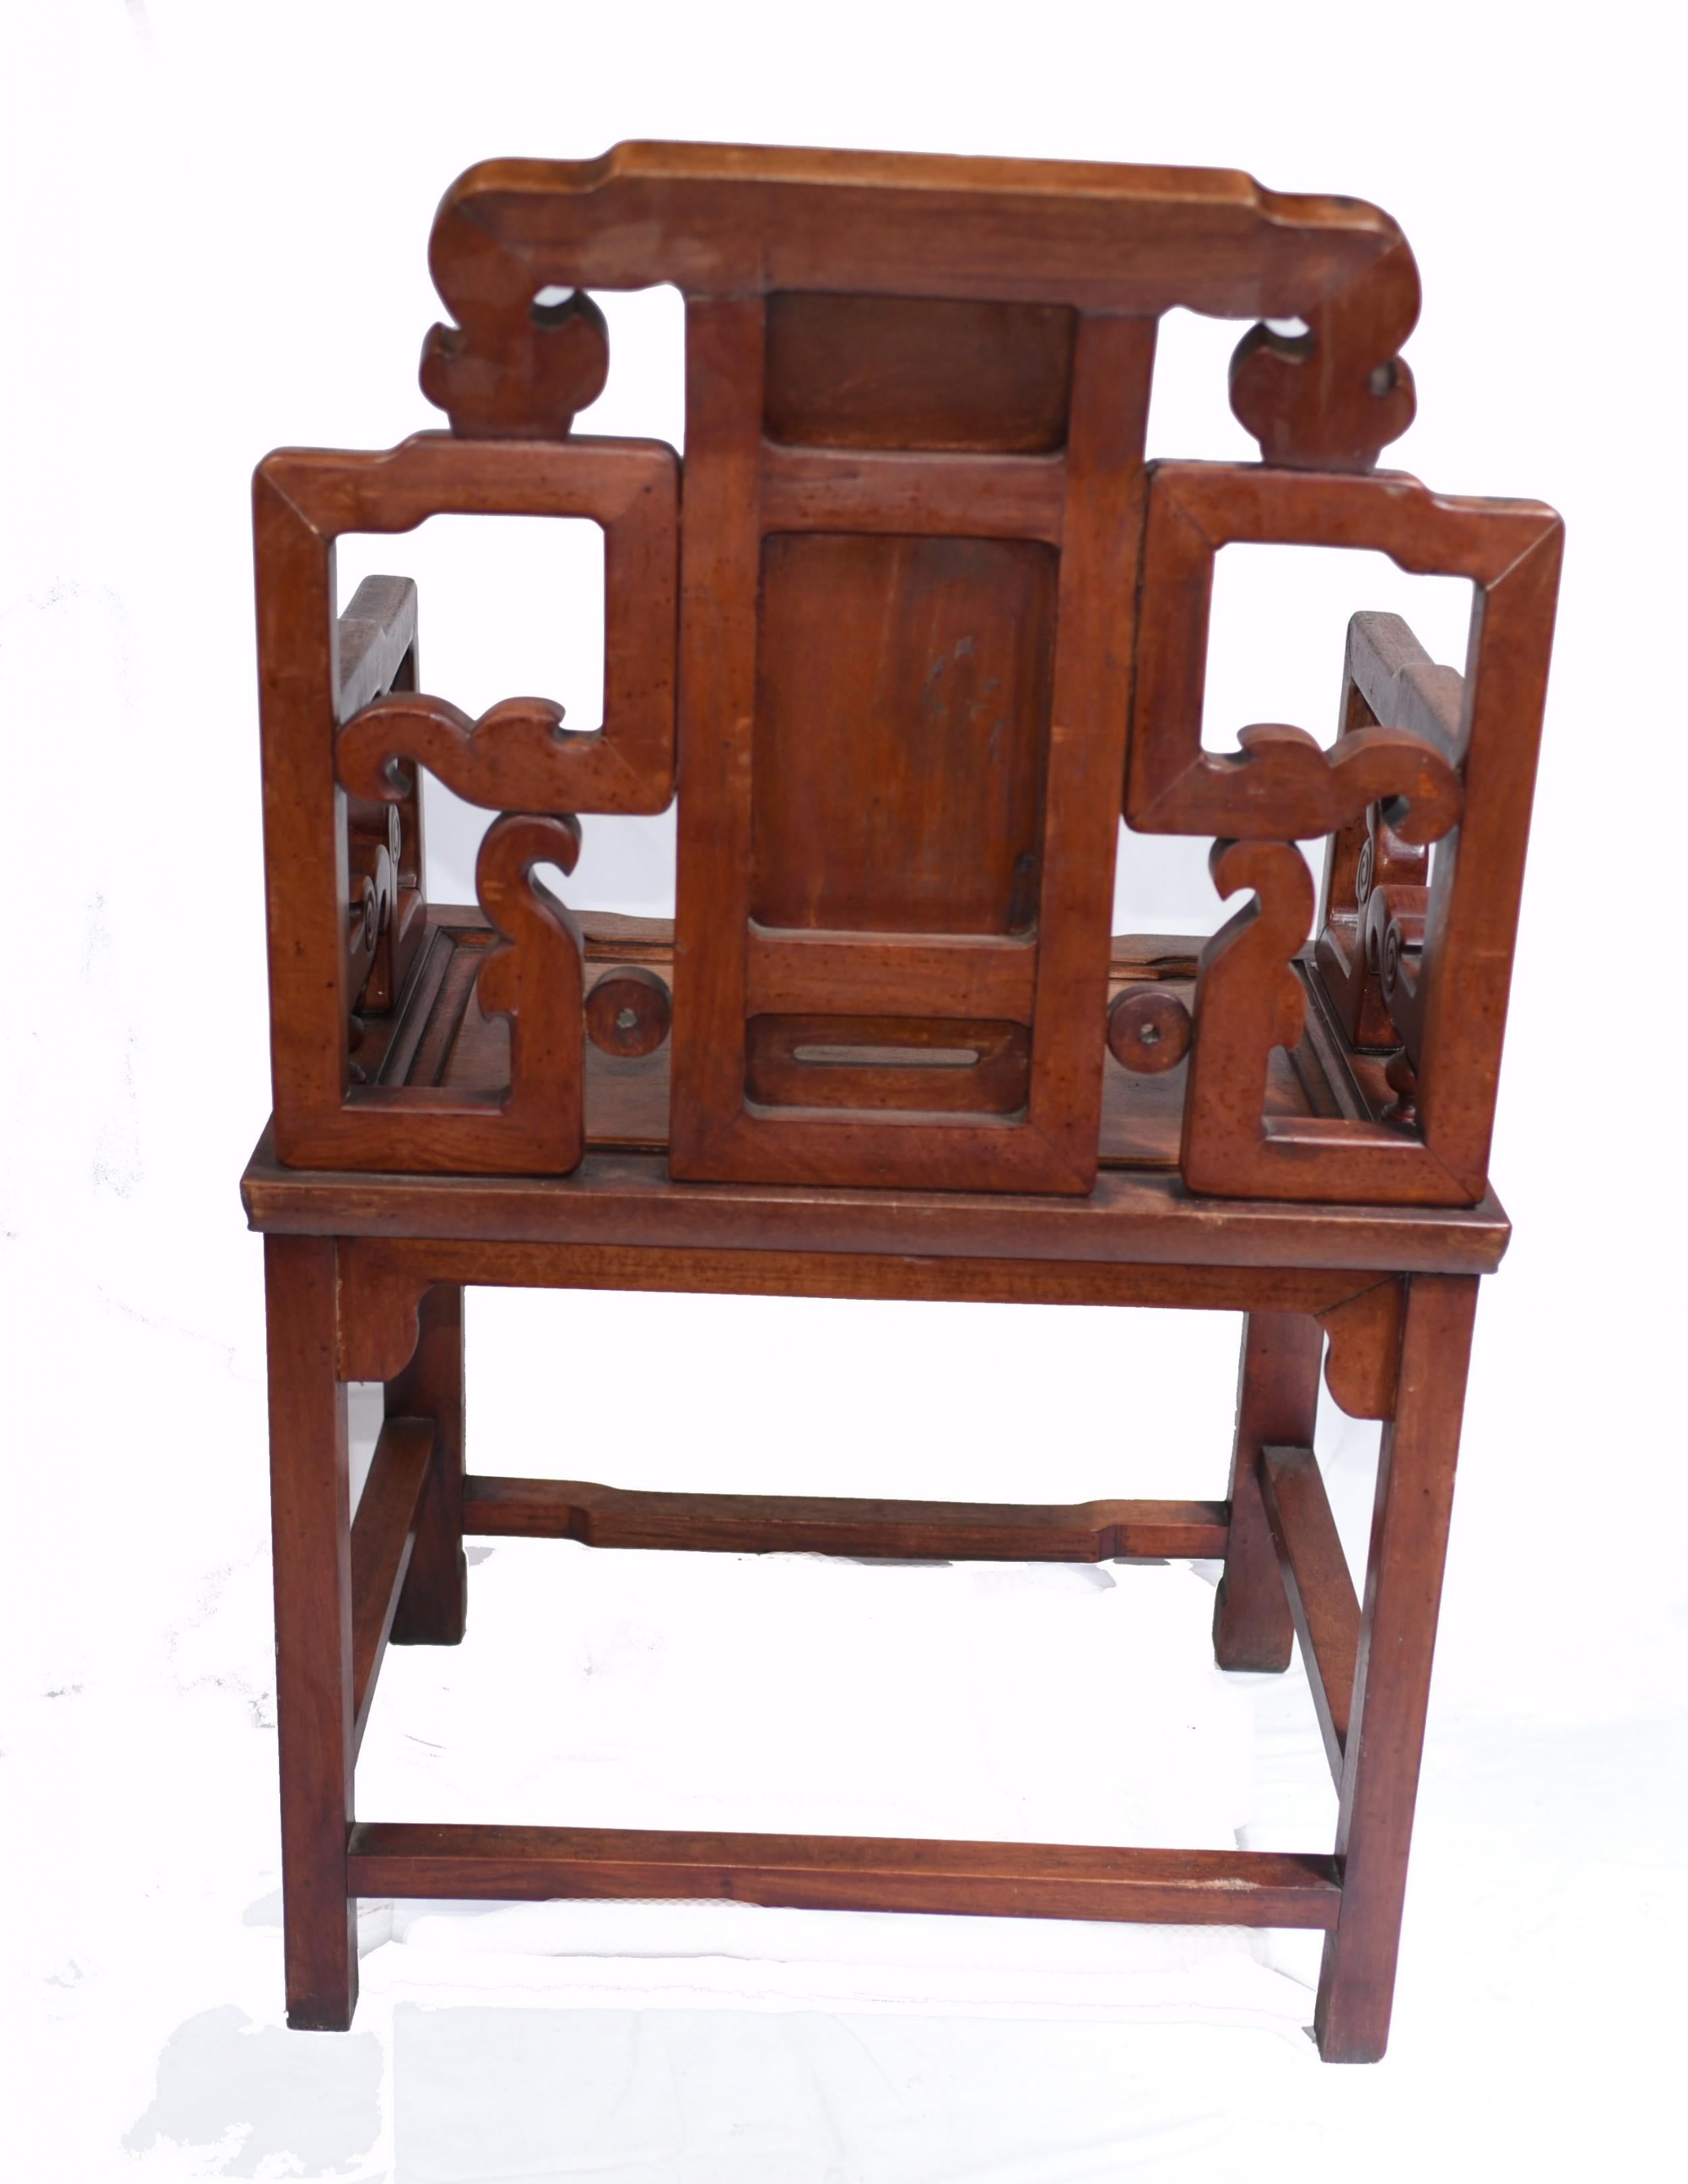 Pair Antique Chinese Arm Chairs - Hardwood Seats Interiors For Sale 2